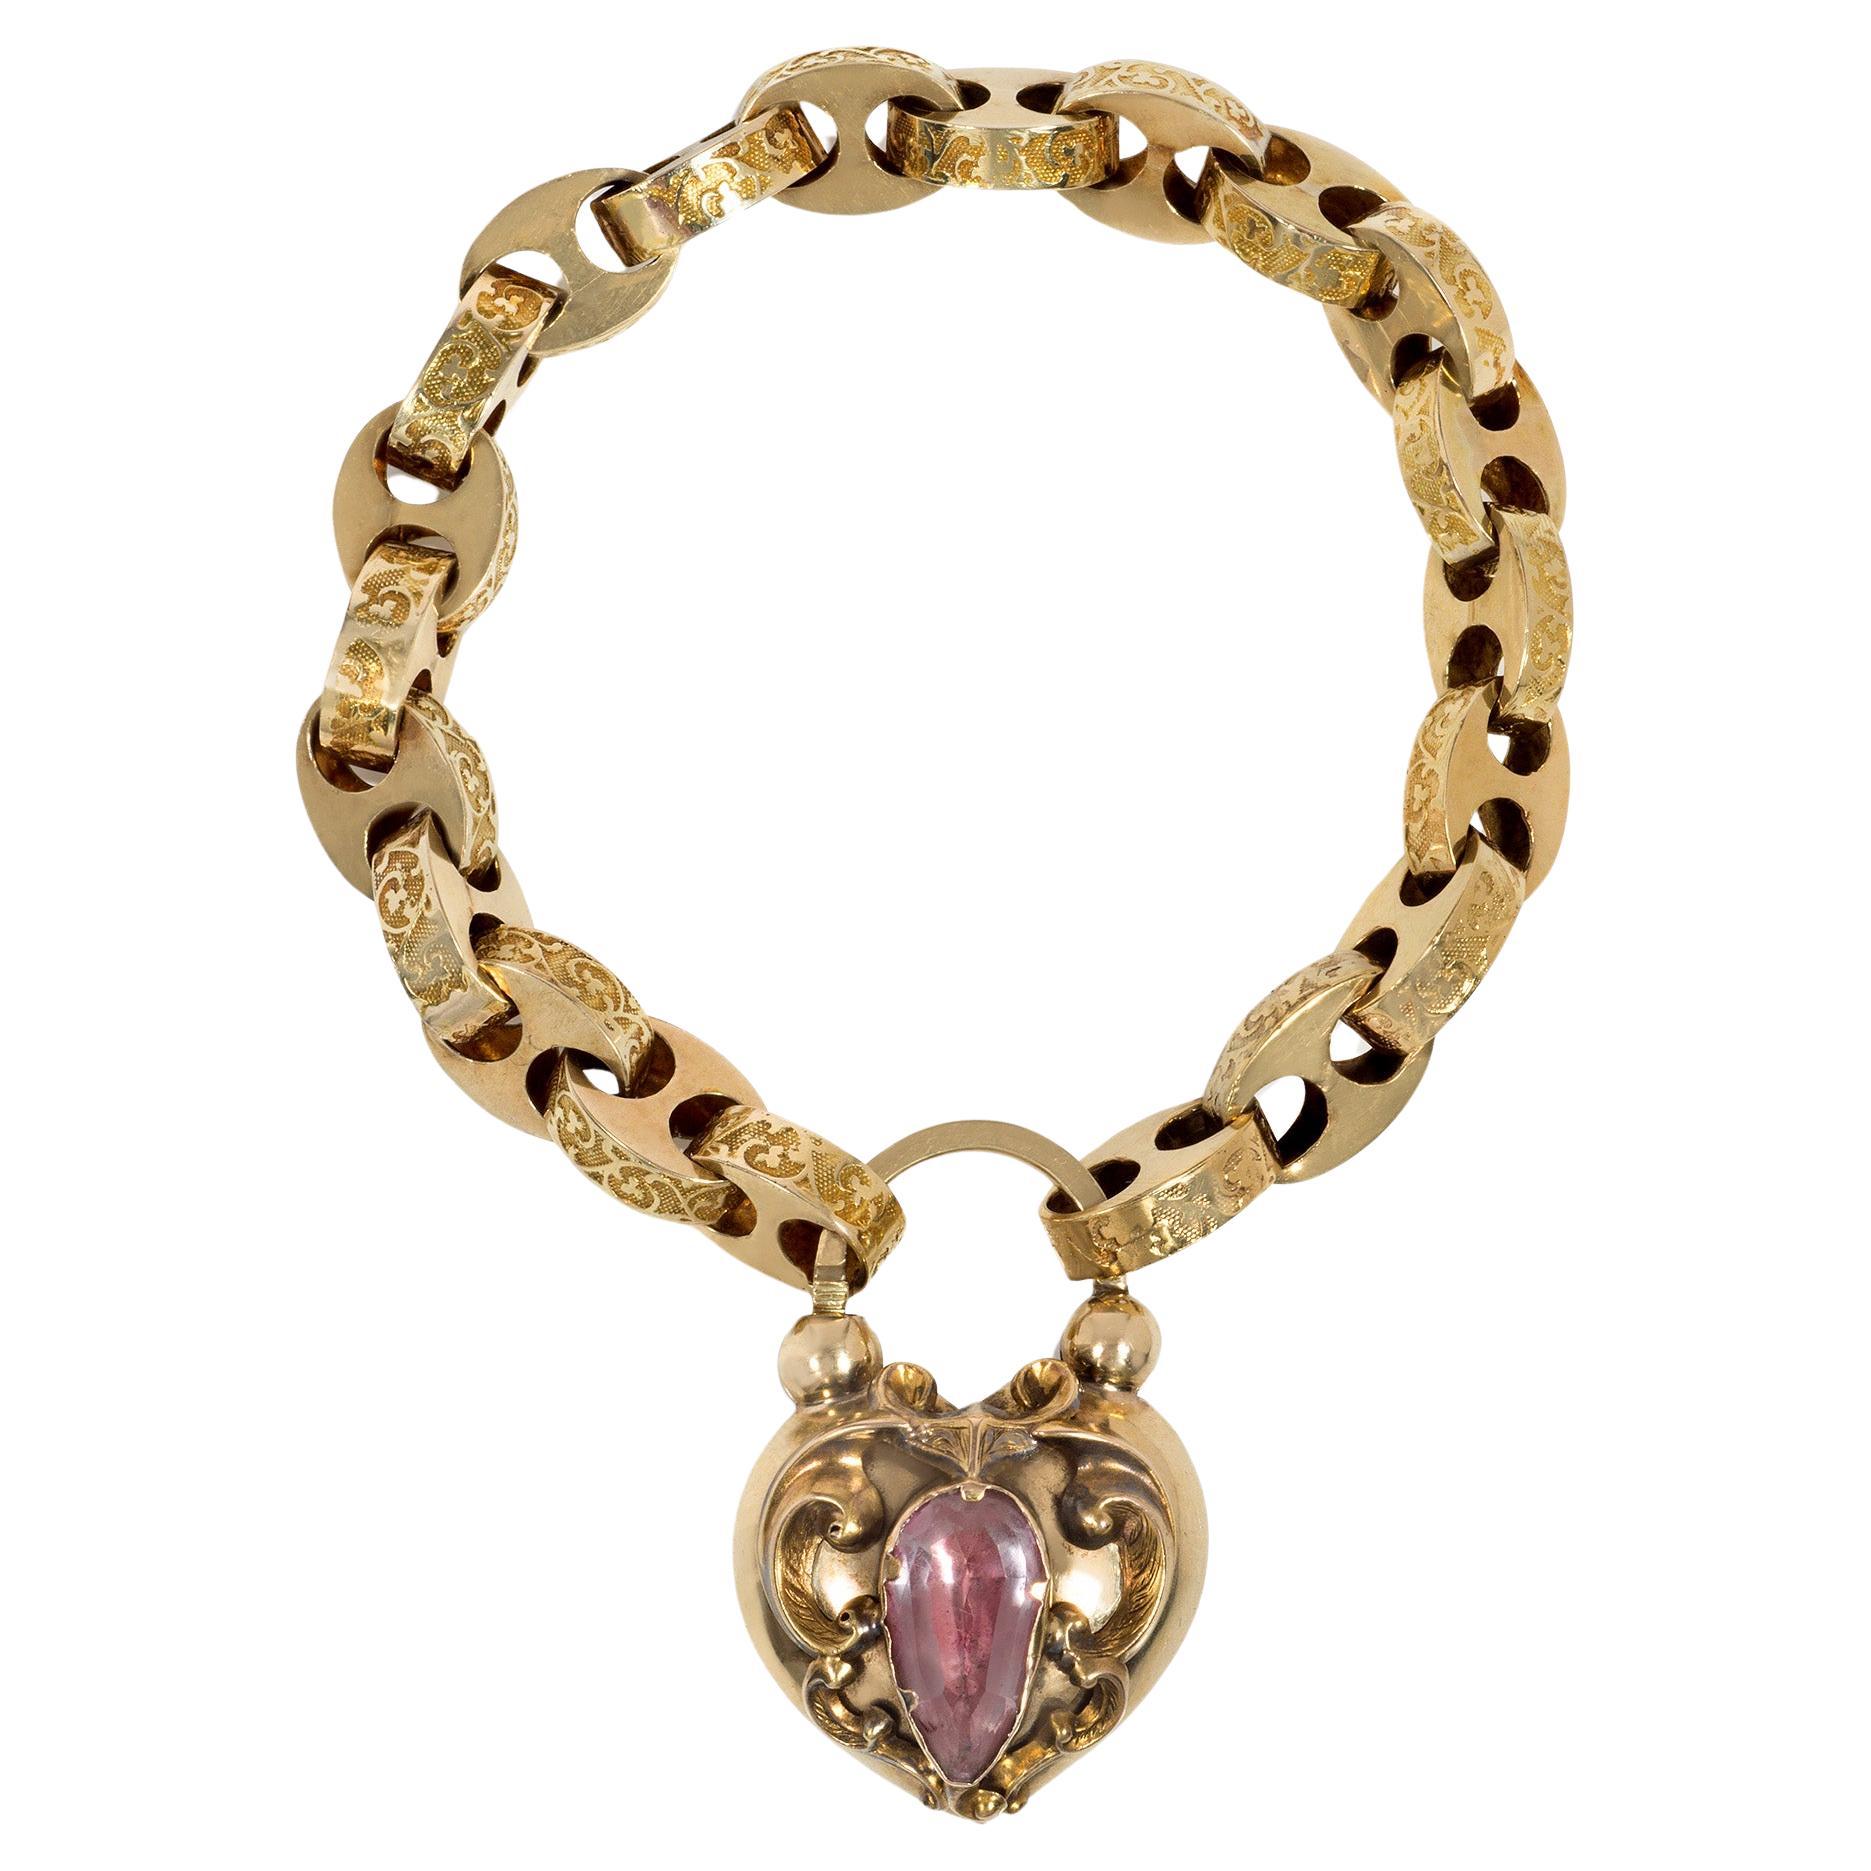 Antique Victorian Gold and Pink Topaz Bracelet with Heart-Shaped Padlock Clasp For Sale